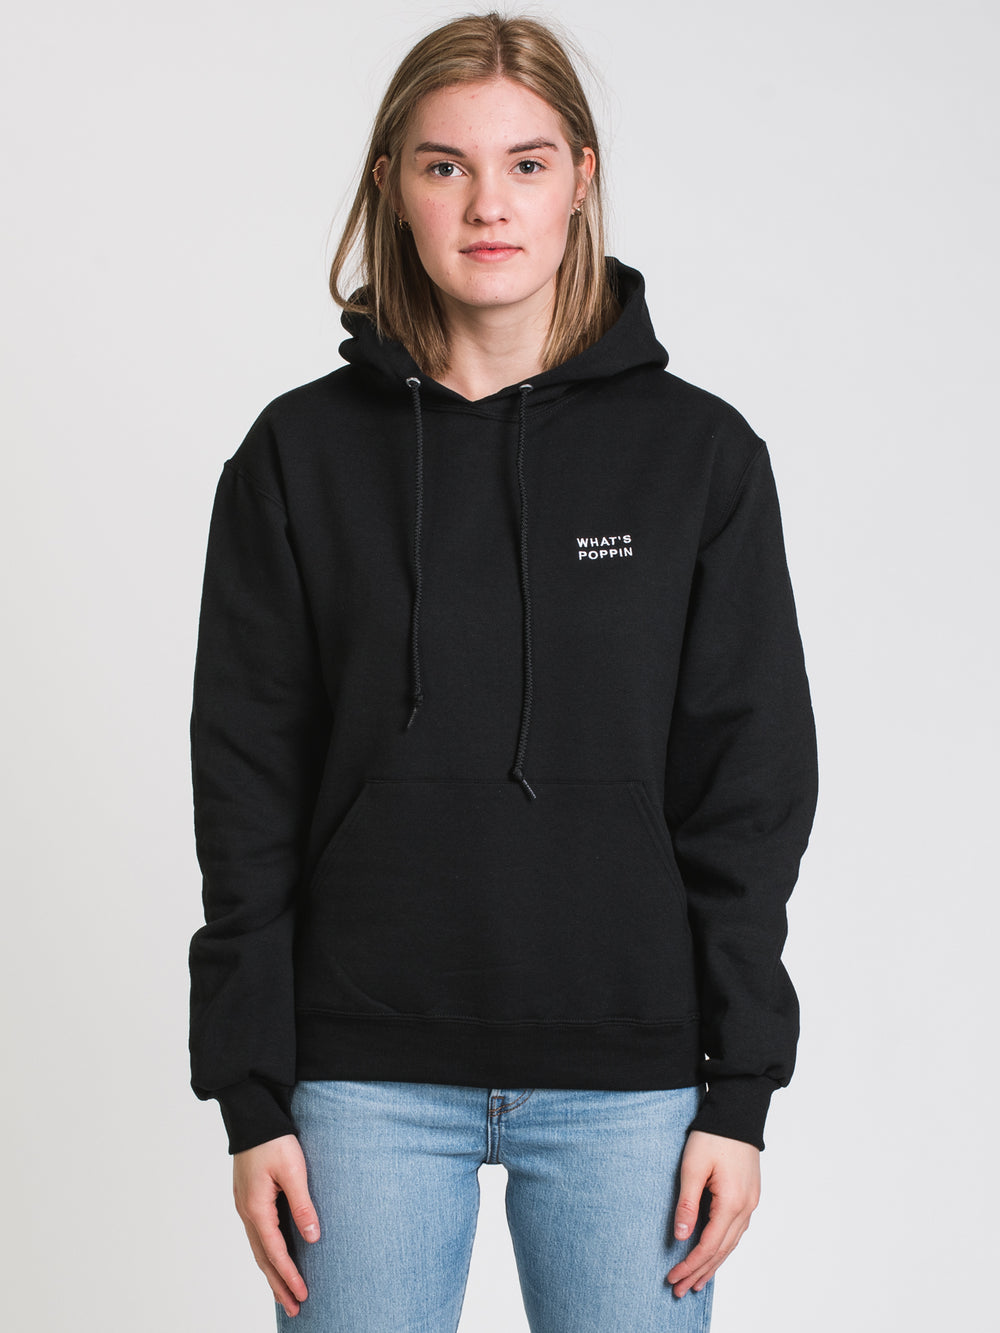 HOTLINE APPAREL UNISEX WHAT'S POPPIN EMBROIDERED HOODIE - BLACK - CLEA